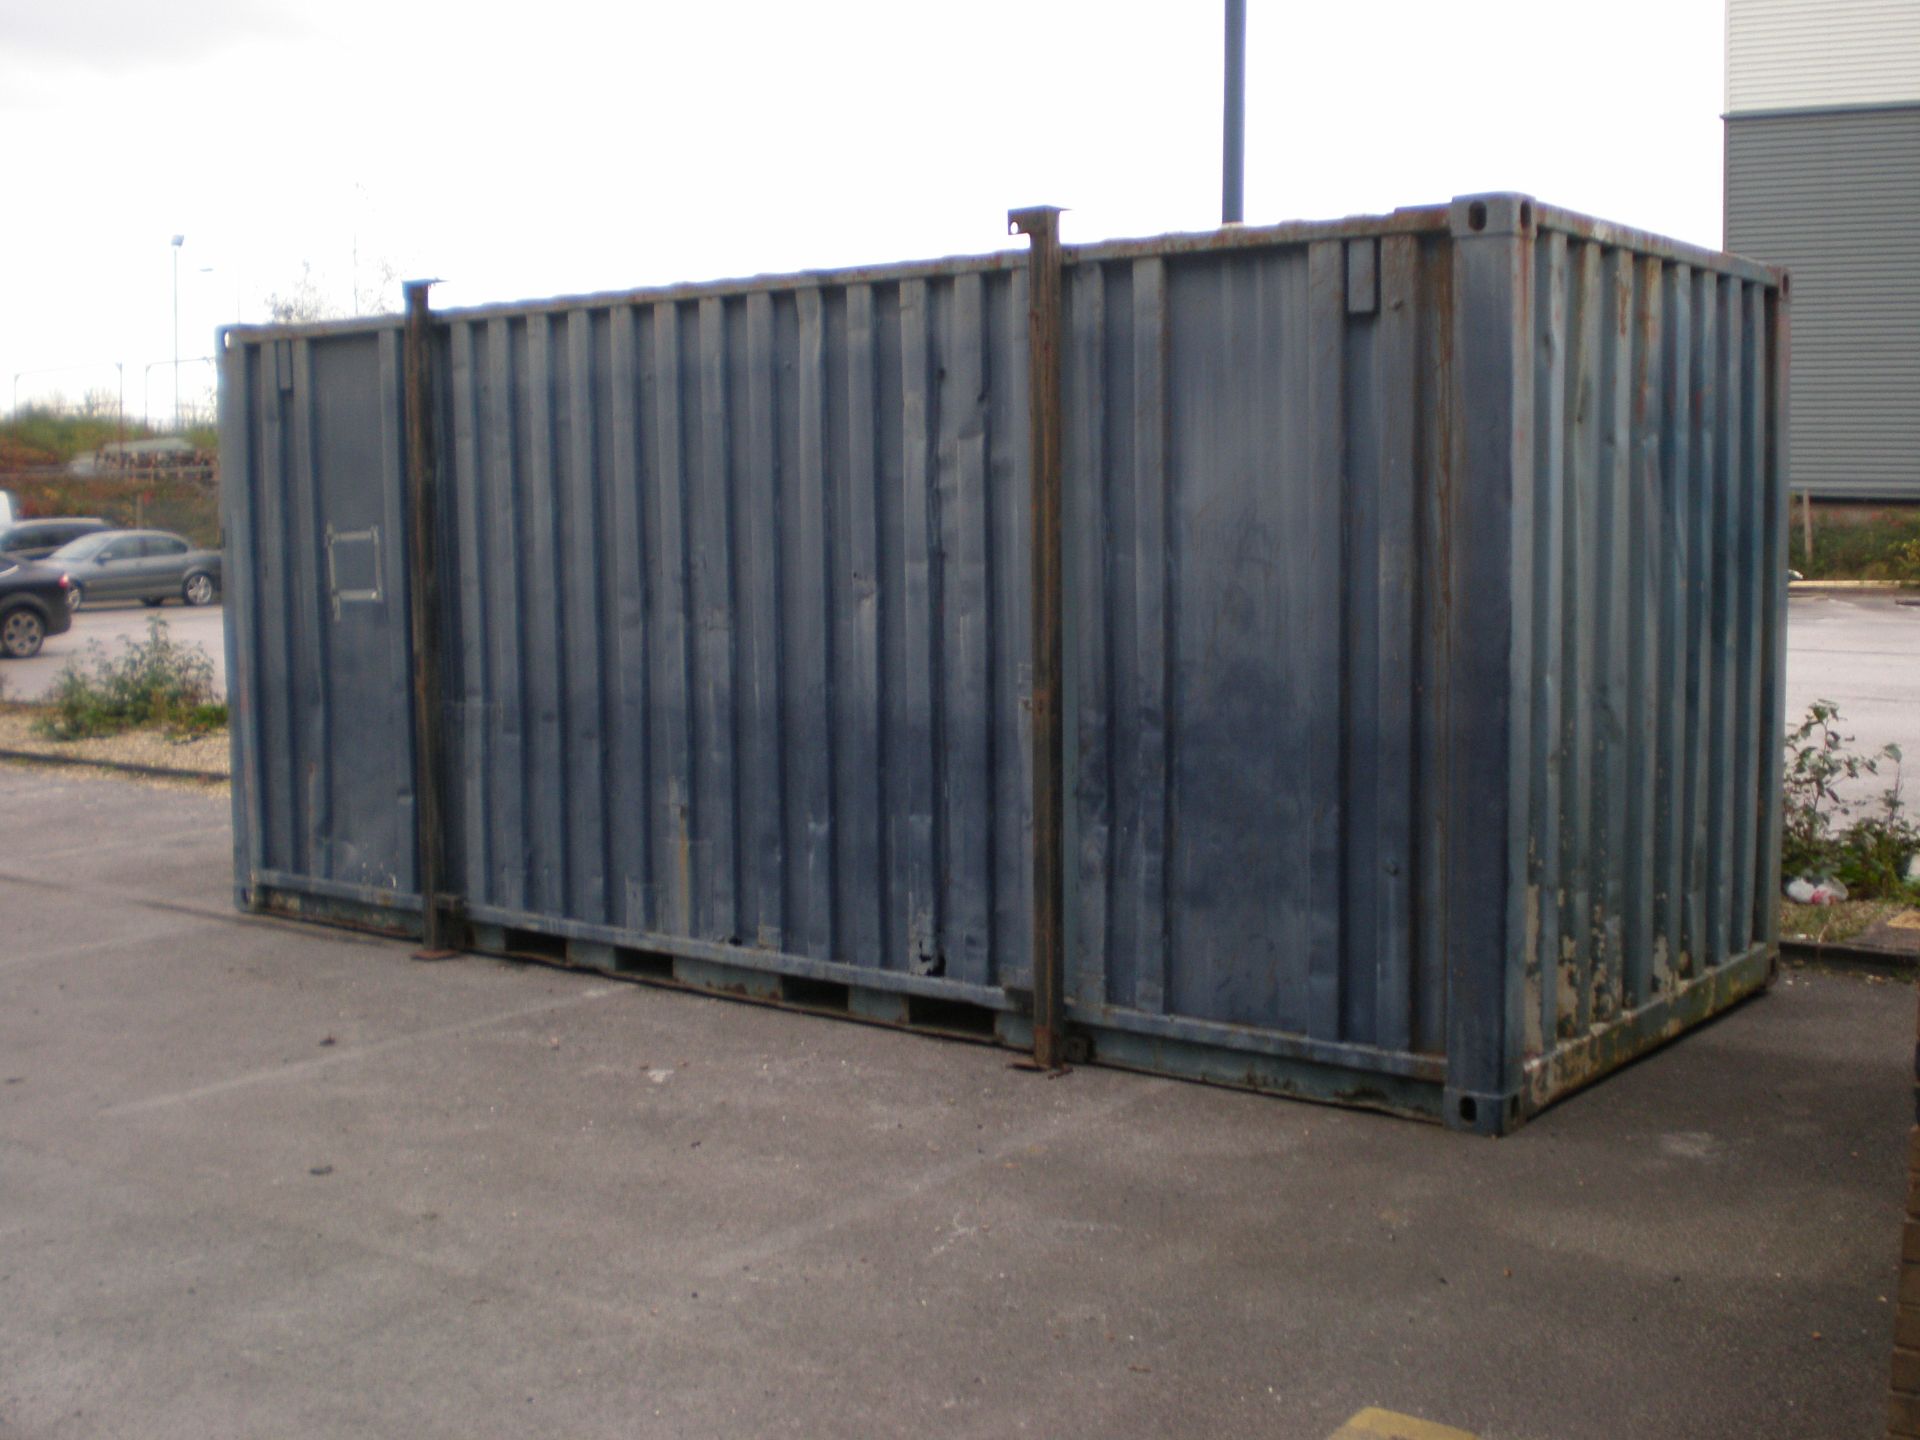 20 Foot Jack Leg Shipping Container With Light And Work Becnh Inside - Image 5 of 5